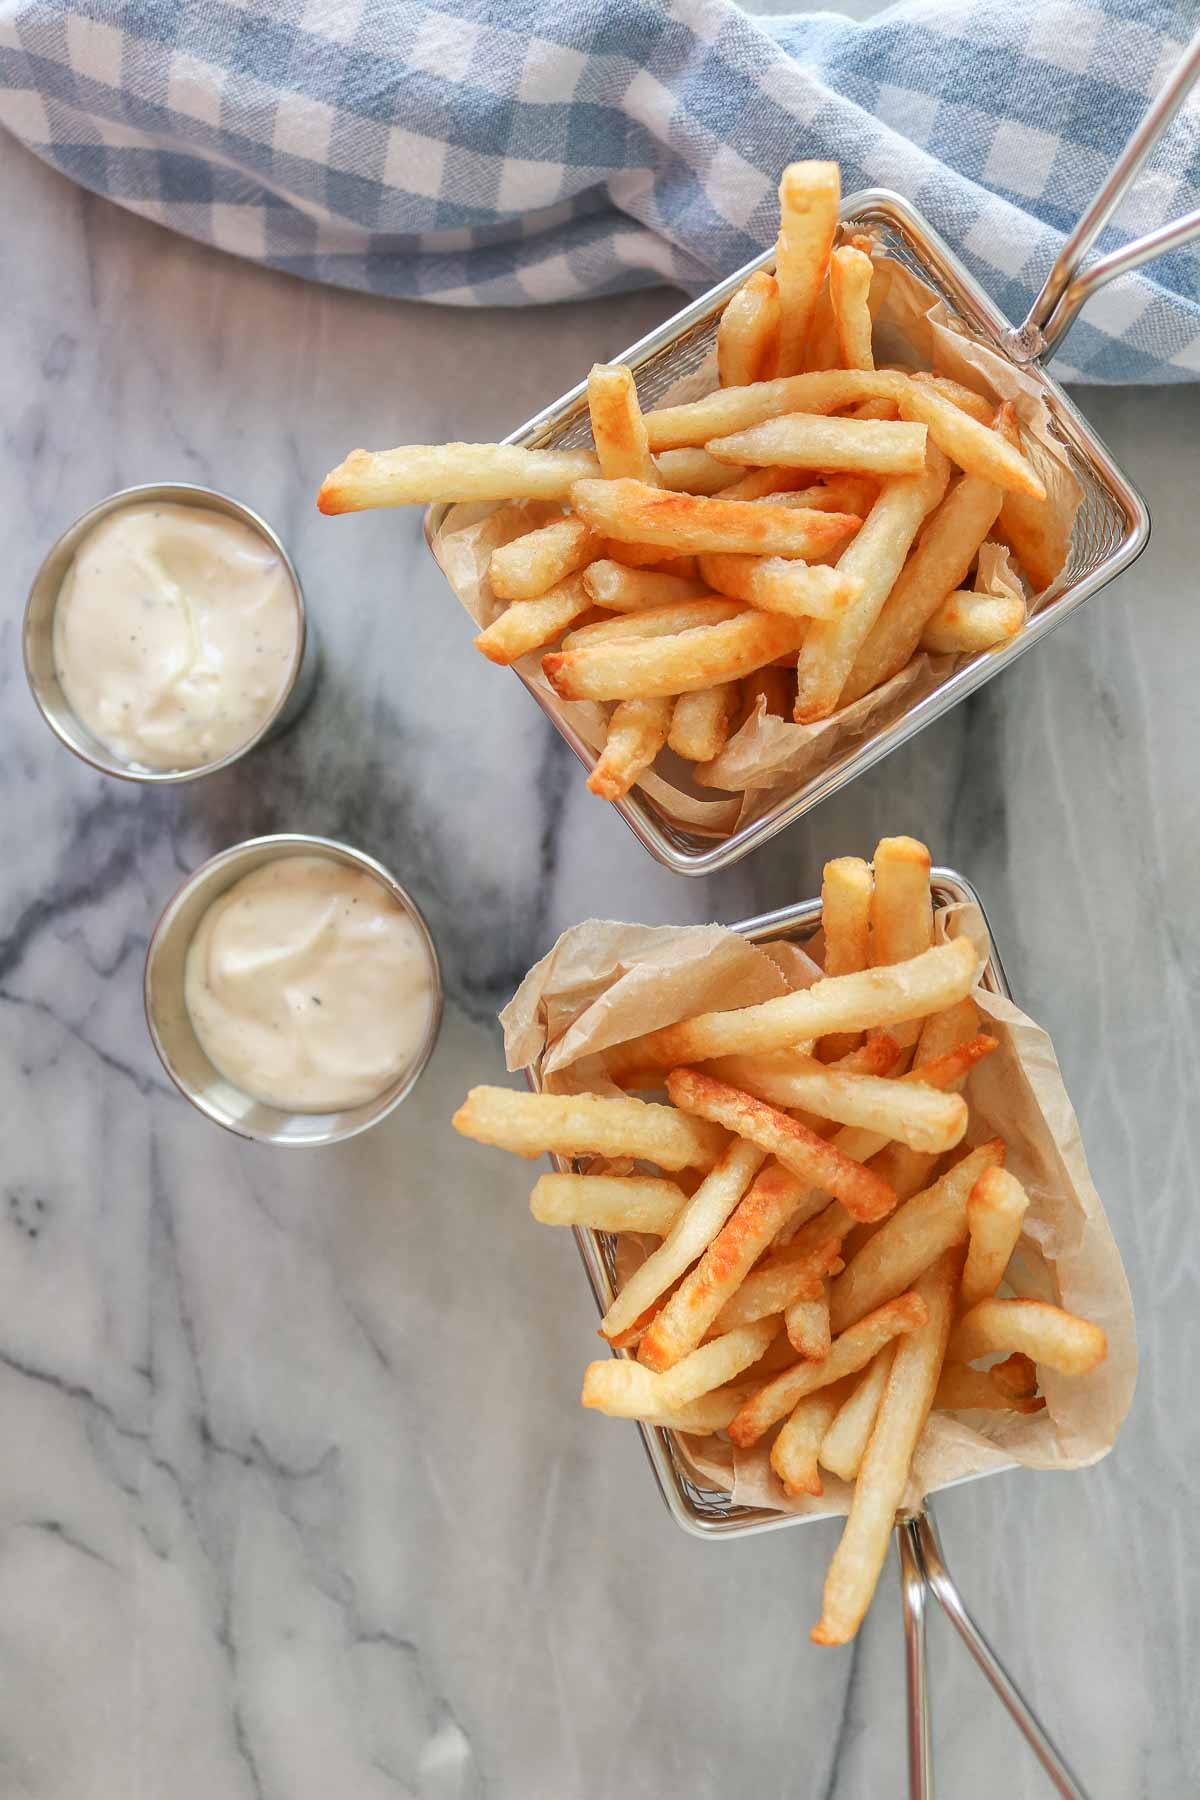 Two servings of fries in stainless steel baskets, each with a serving of truffle mayo.